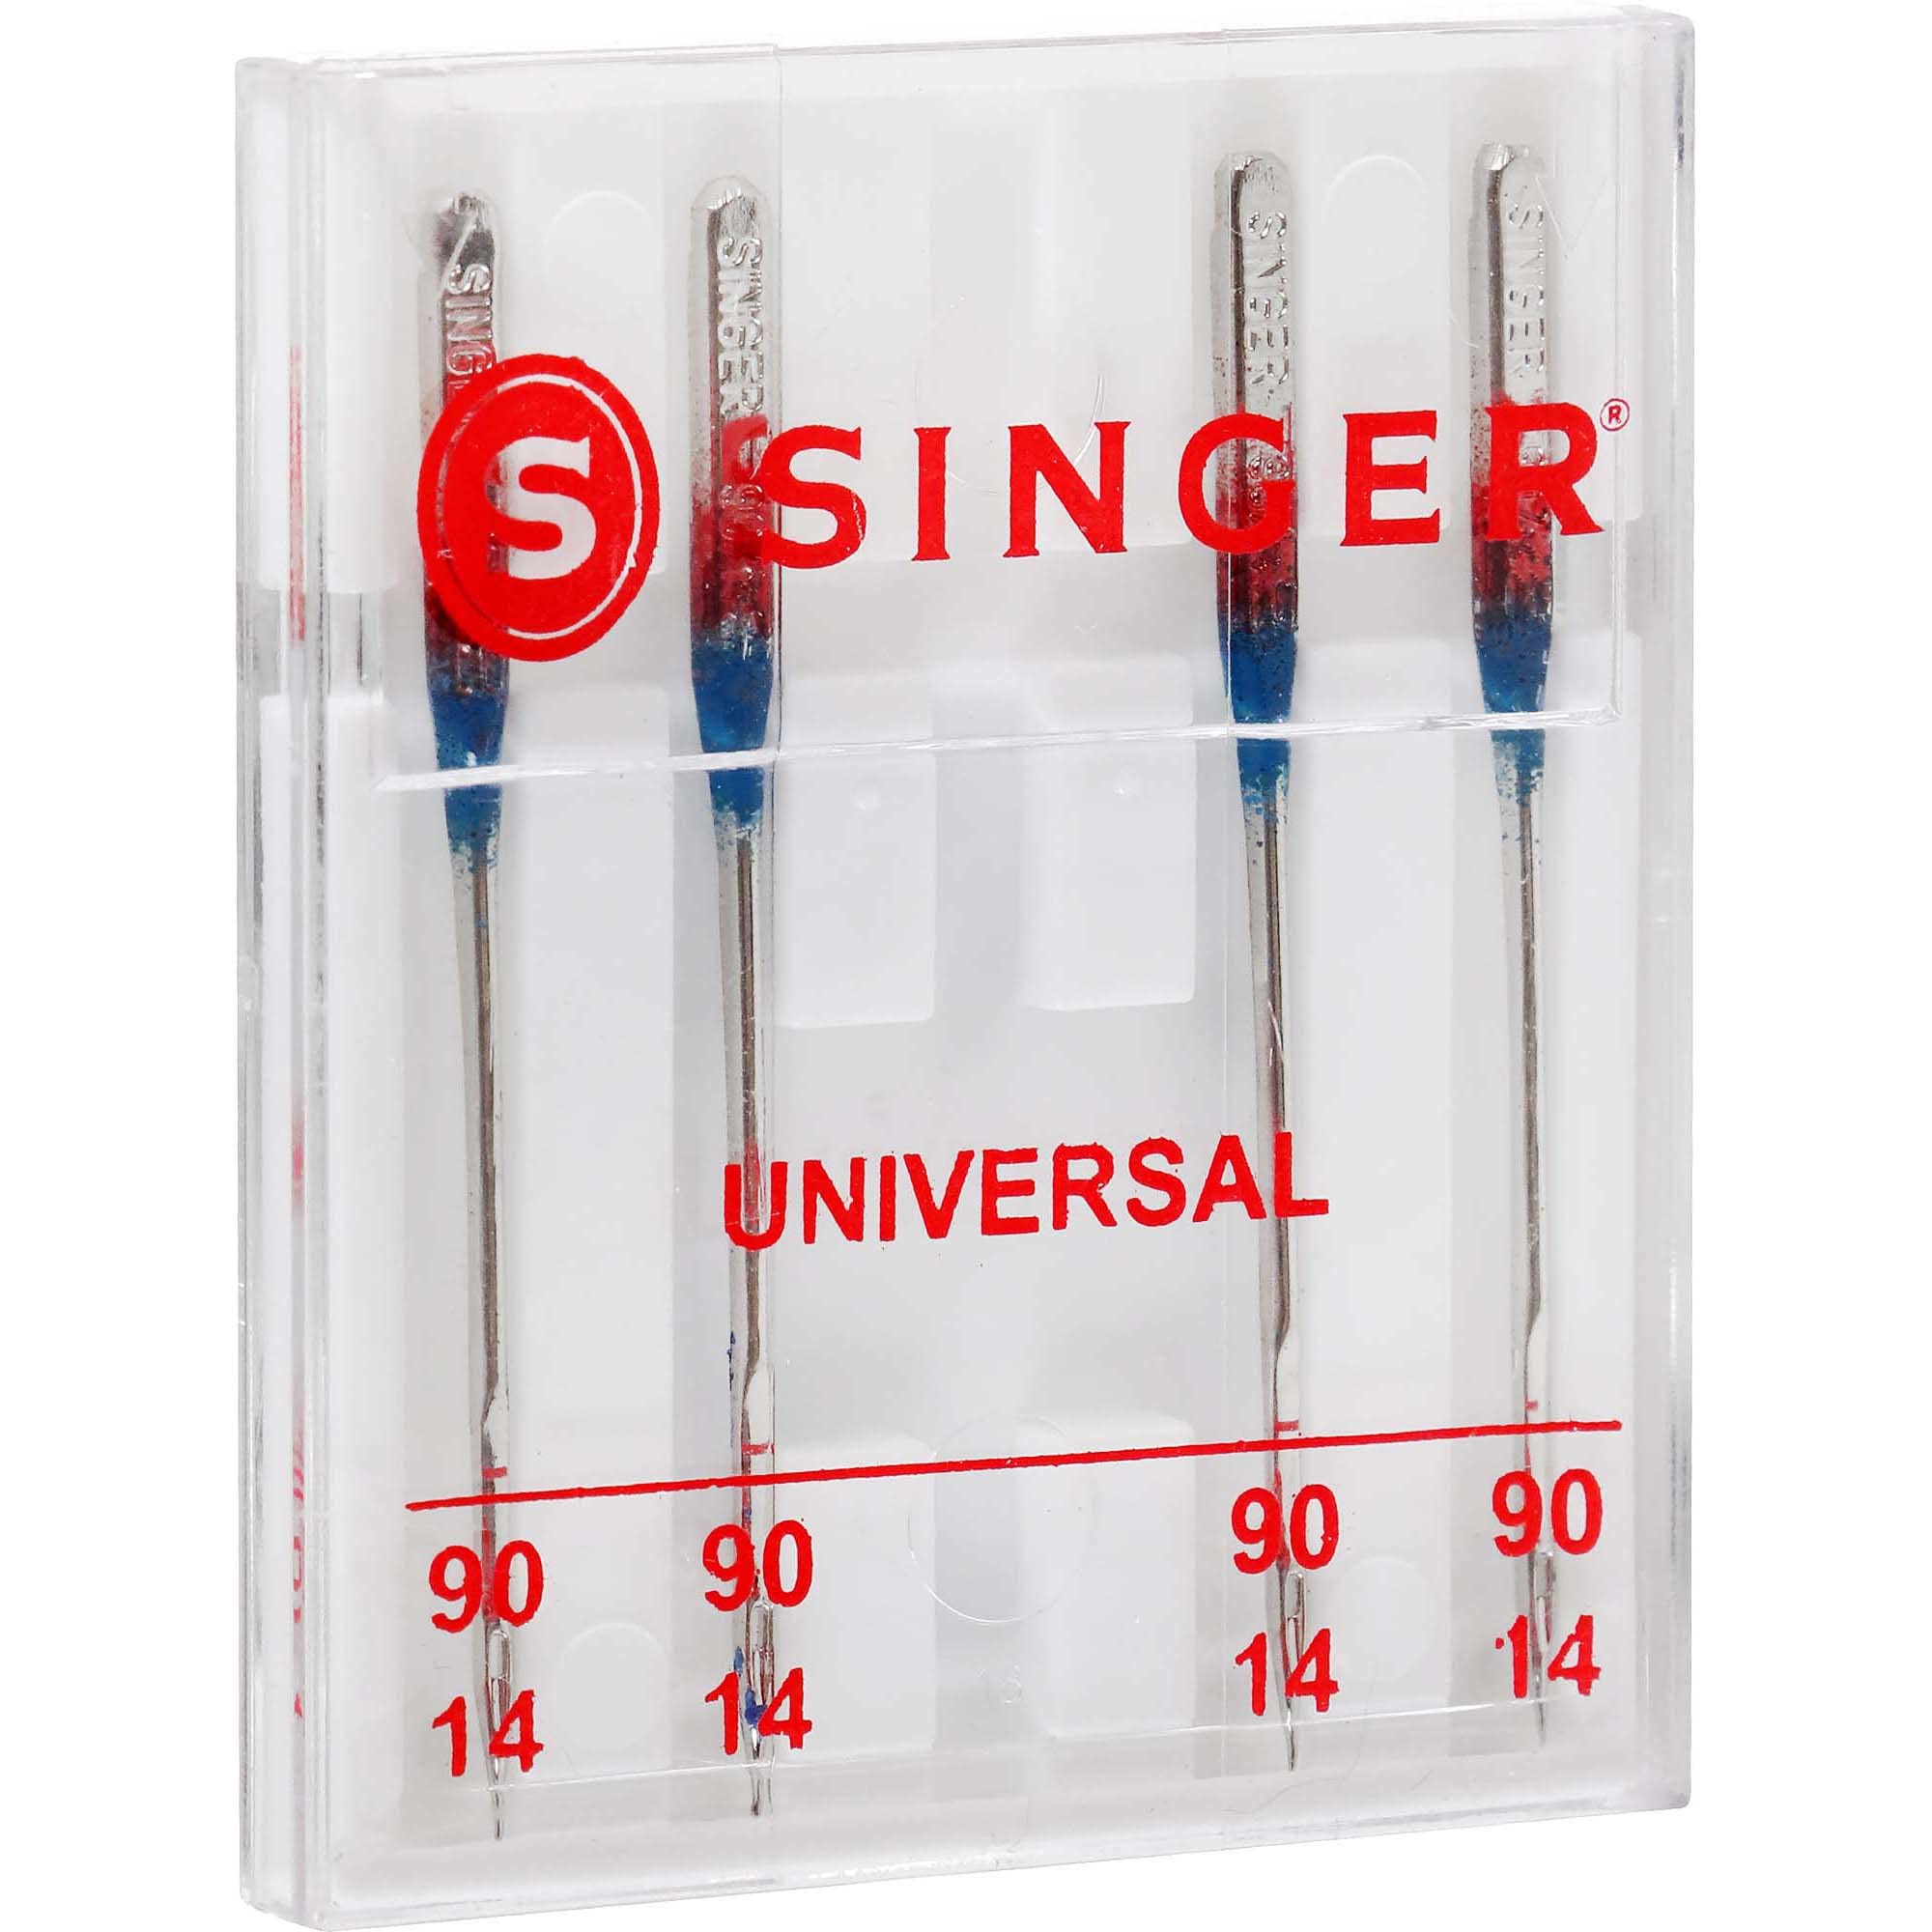 SINGER 04736 Sewing Machine Needles, 5-Pack, 90/14-5 5 Count